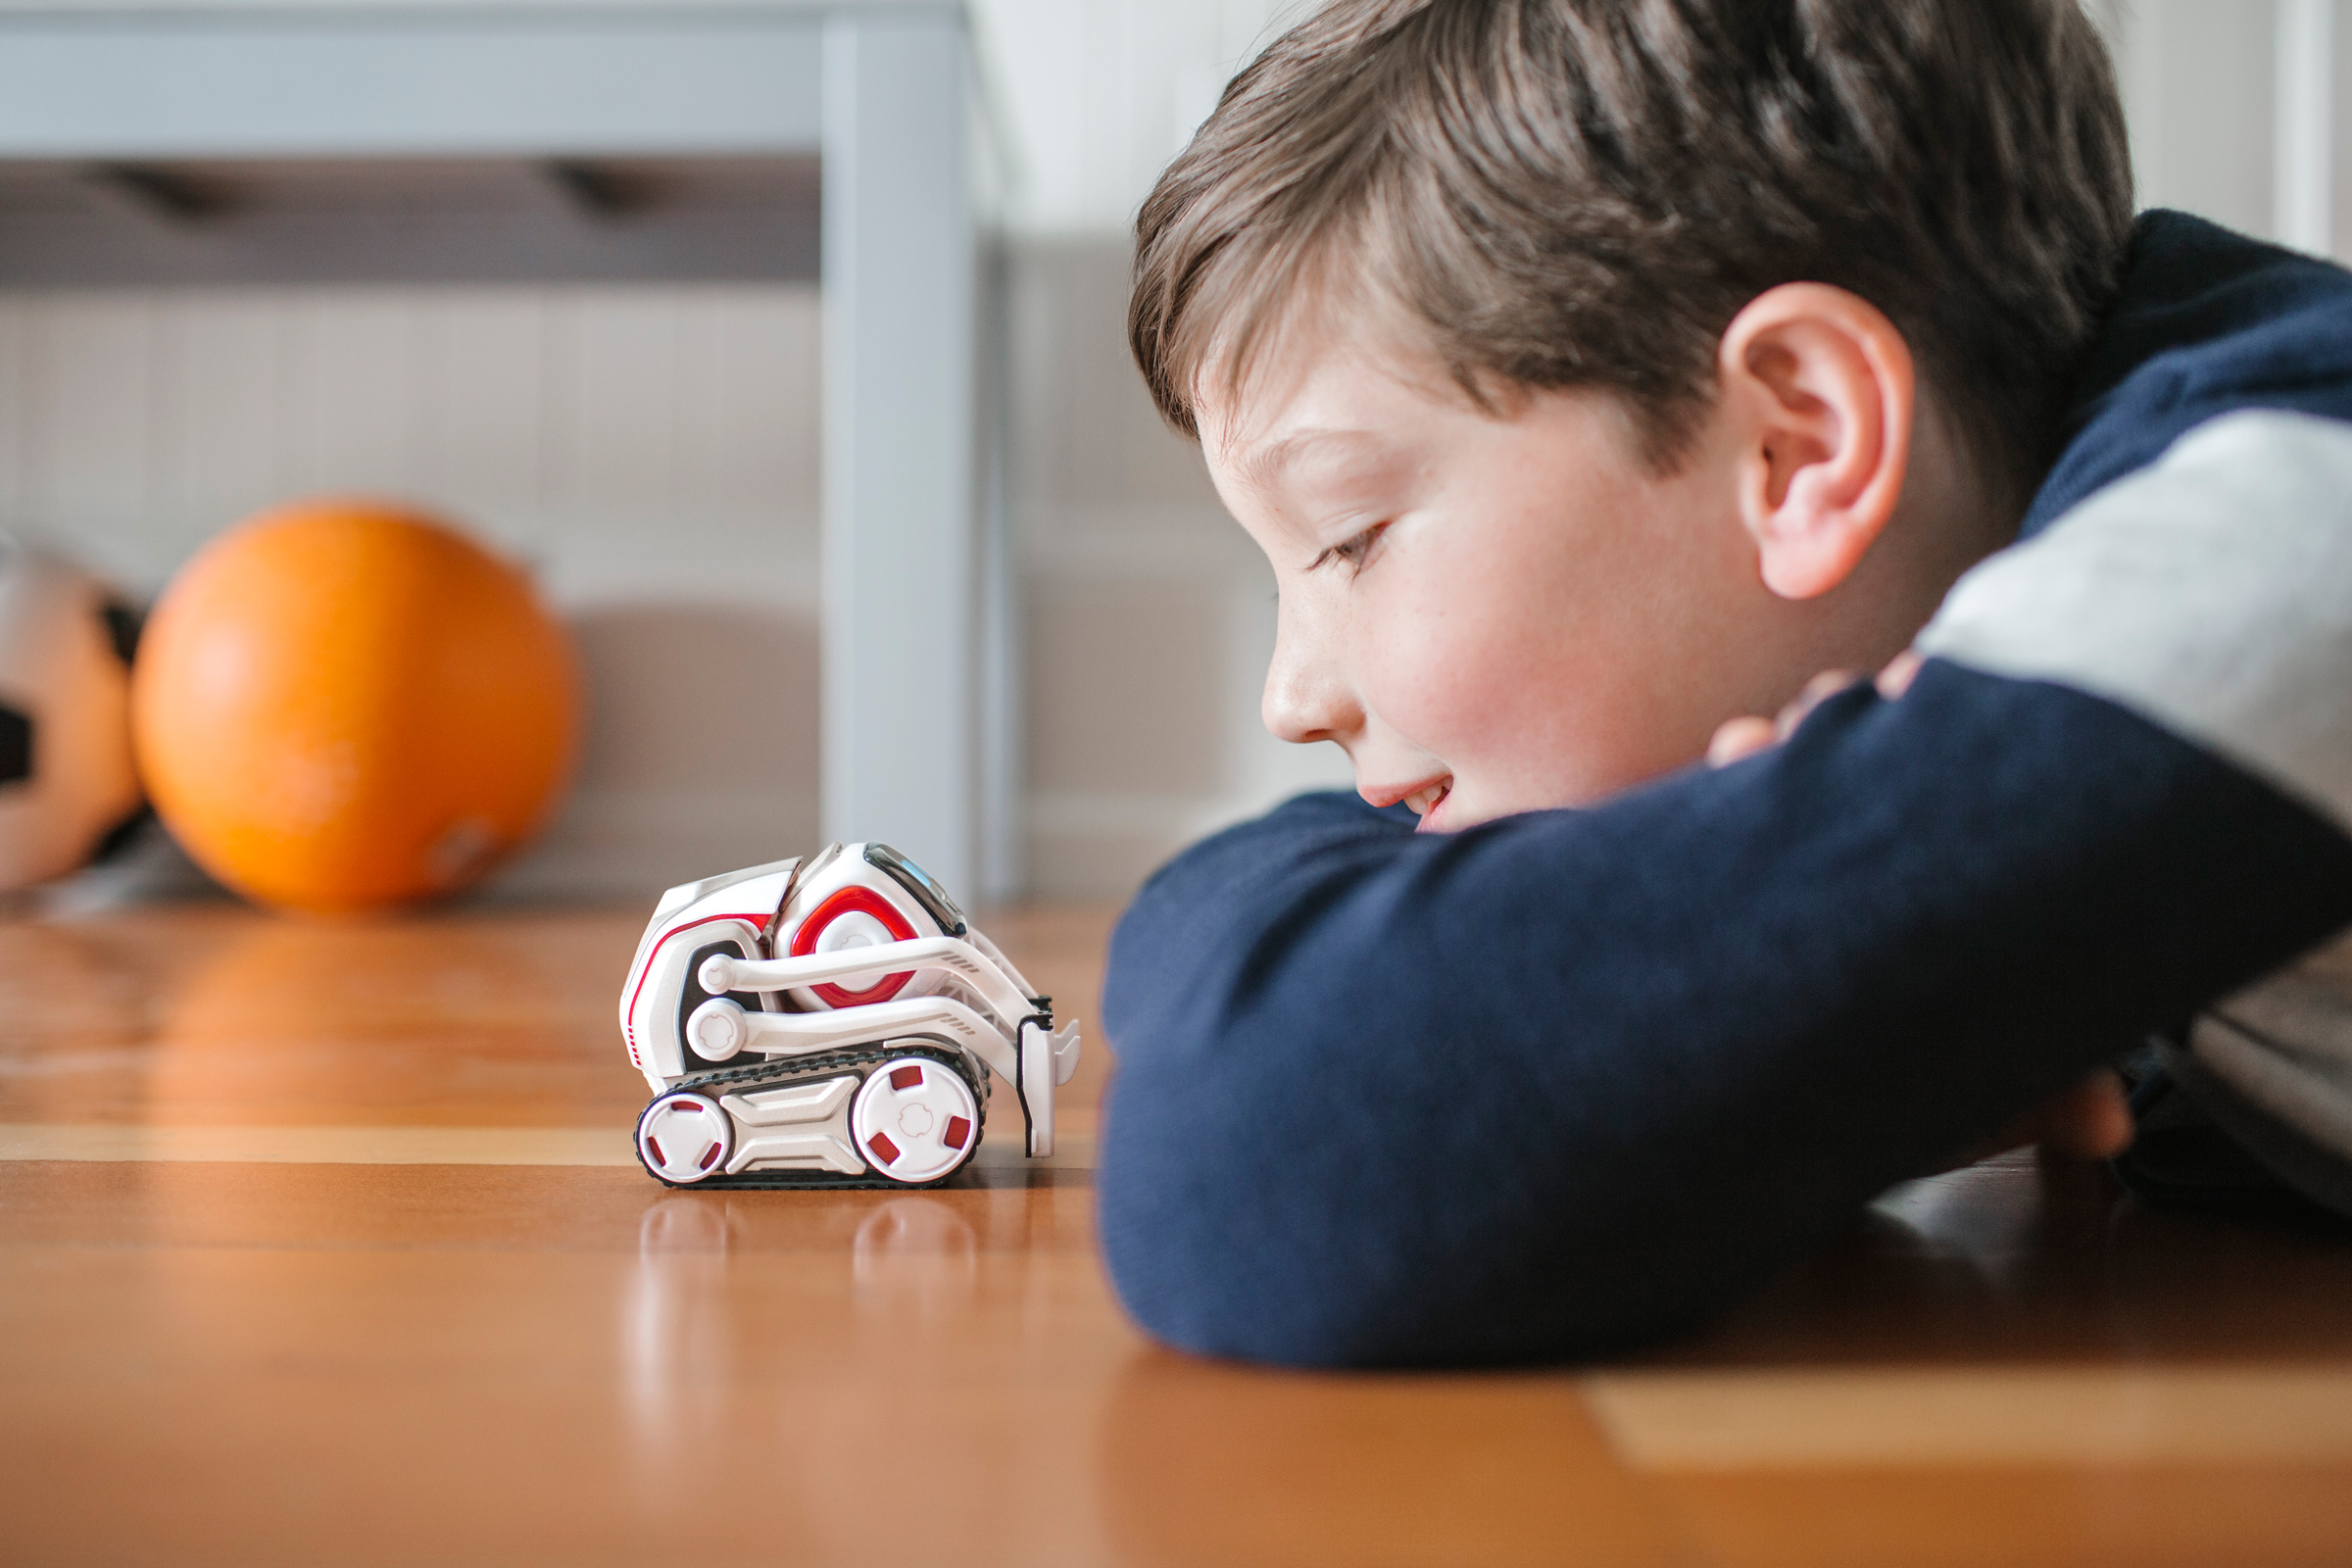 Cozmo blazed a trail when it launched in 2017 earning the top spot for the best-selling toy on Amazon U.S. two years in a row and the best-selling toy on Amazon in the UK and France in 2017 
(Photo: Digital Dream Labs)